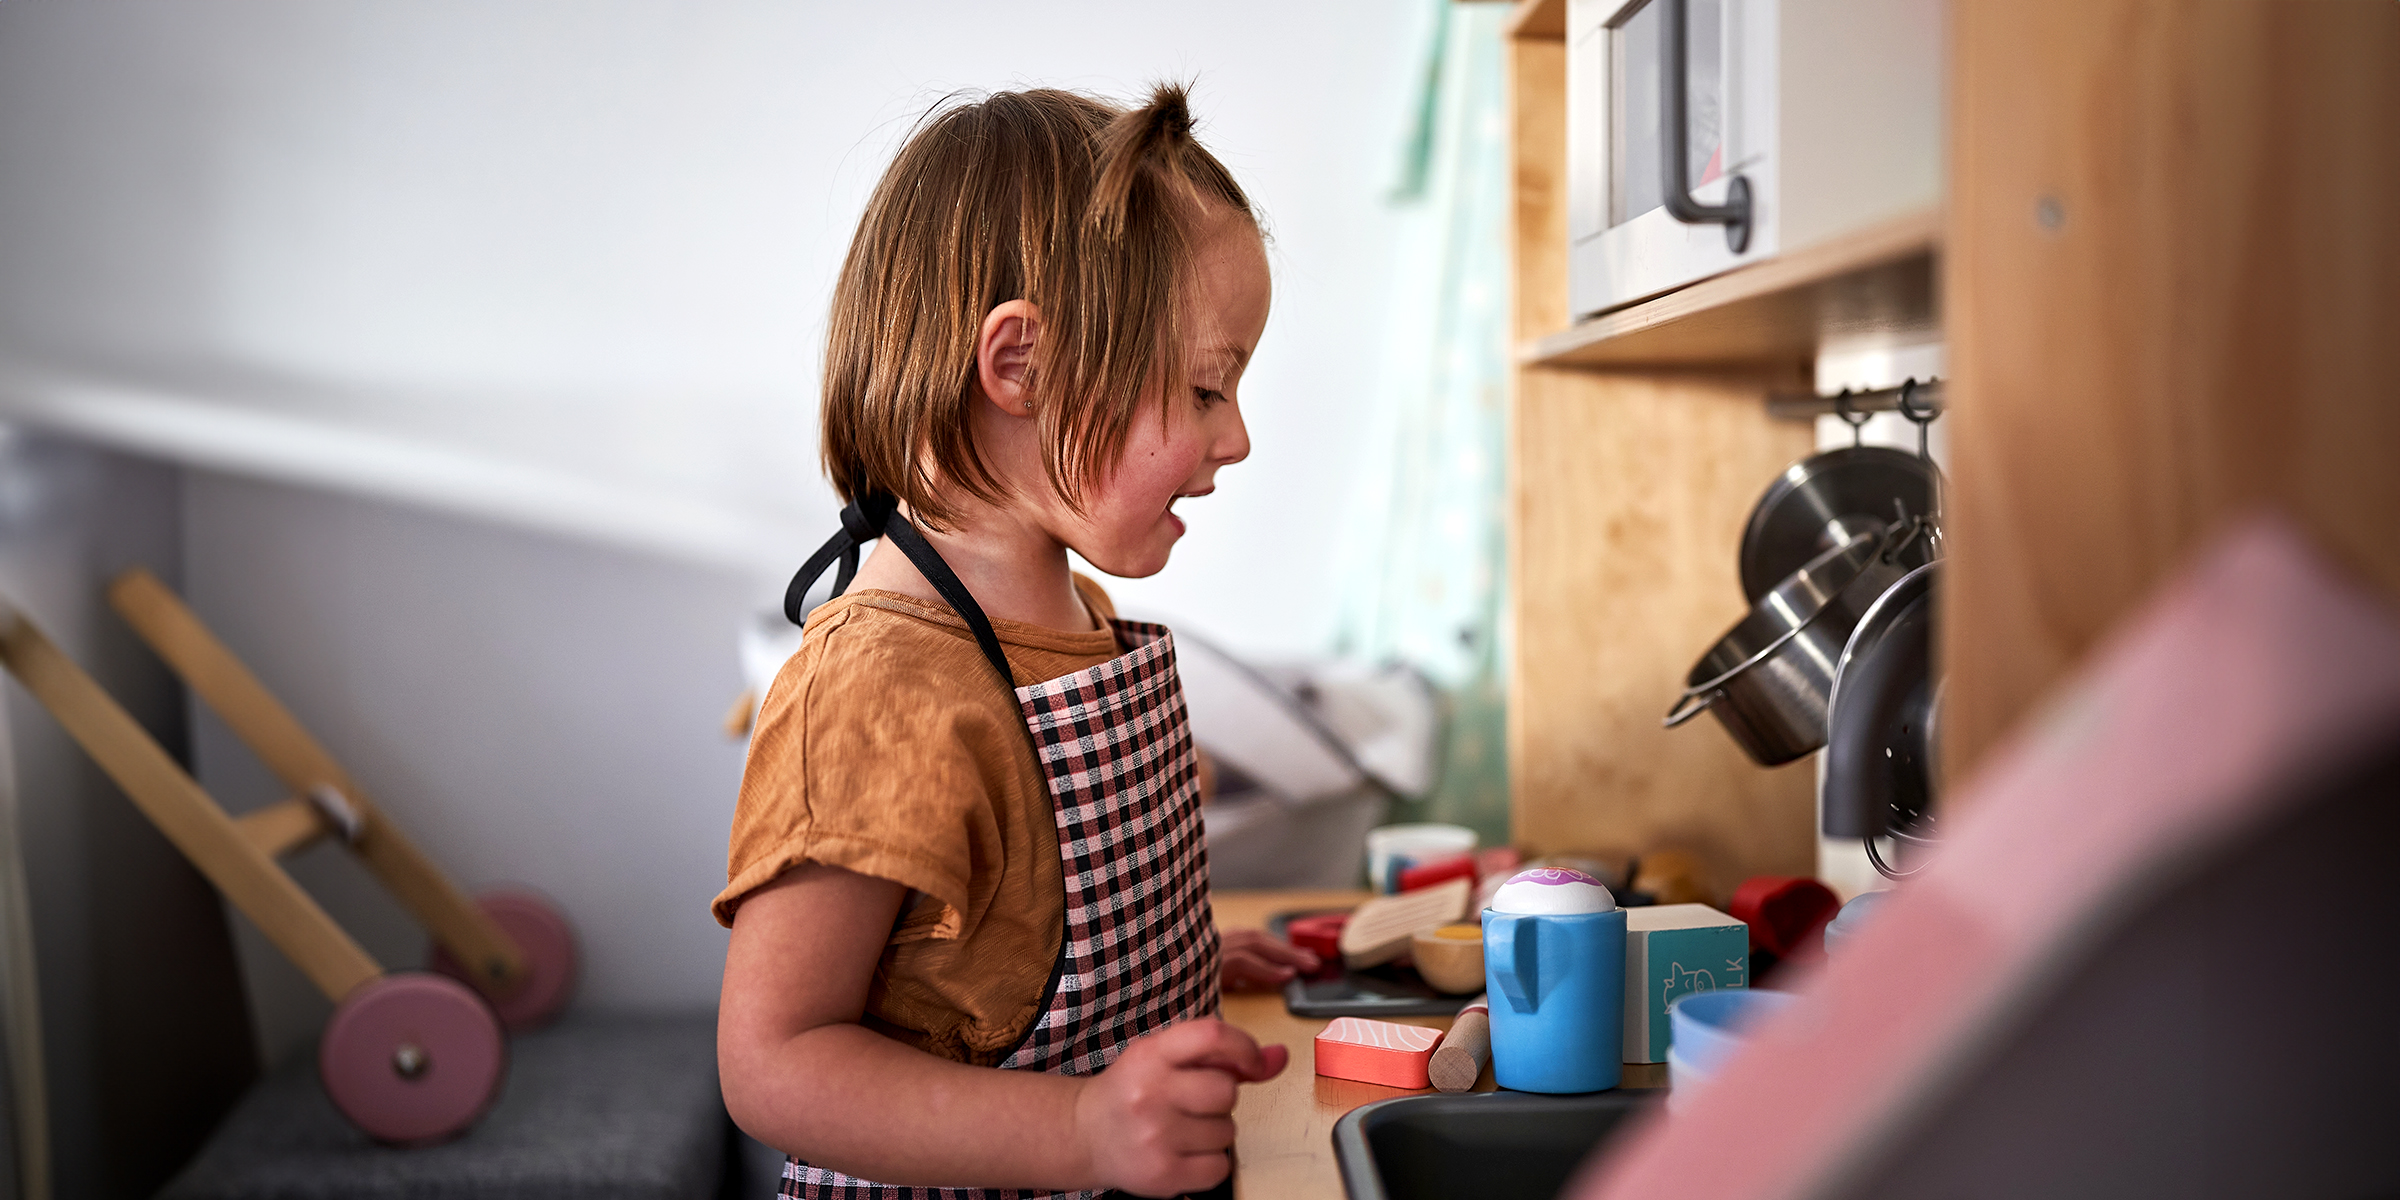 A little girl playing with her mini kitchen set | Source: Shutterstock